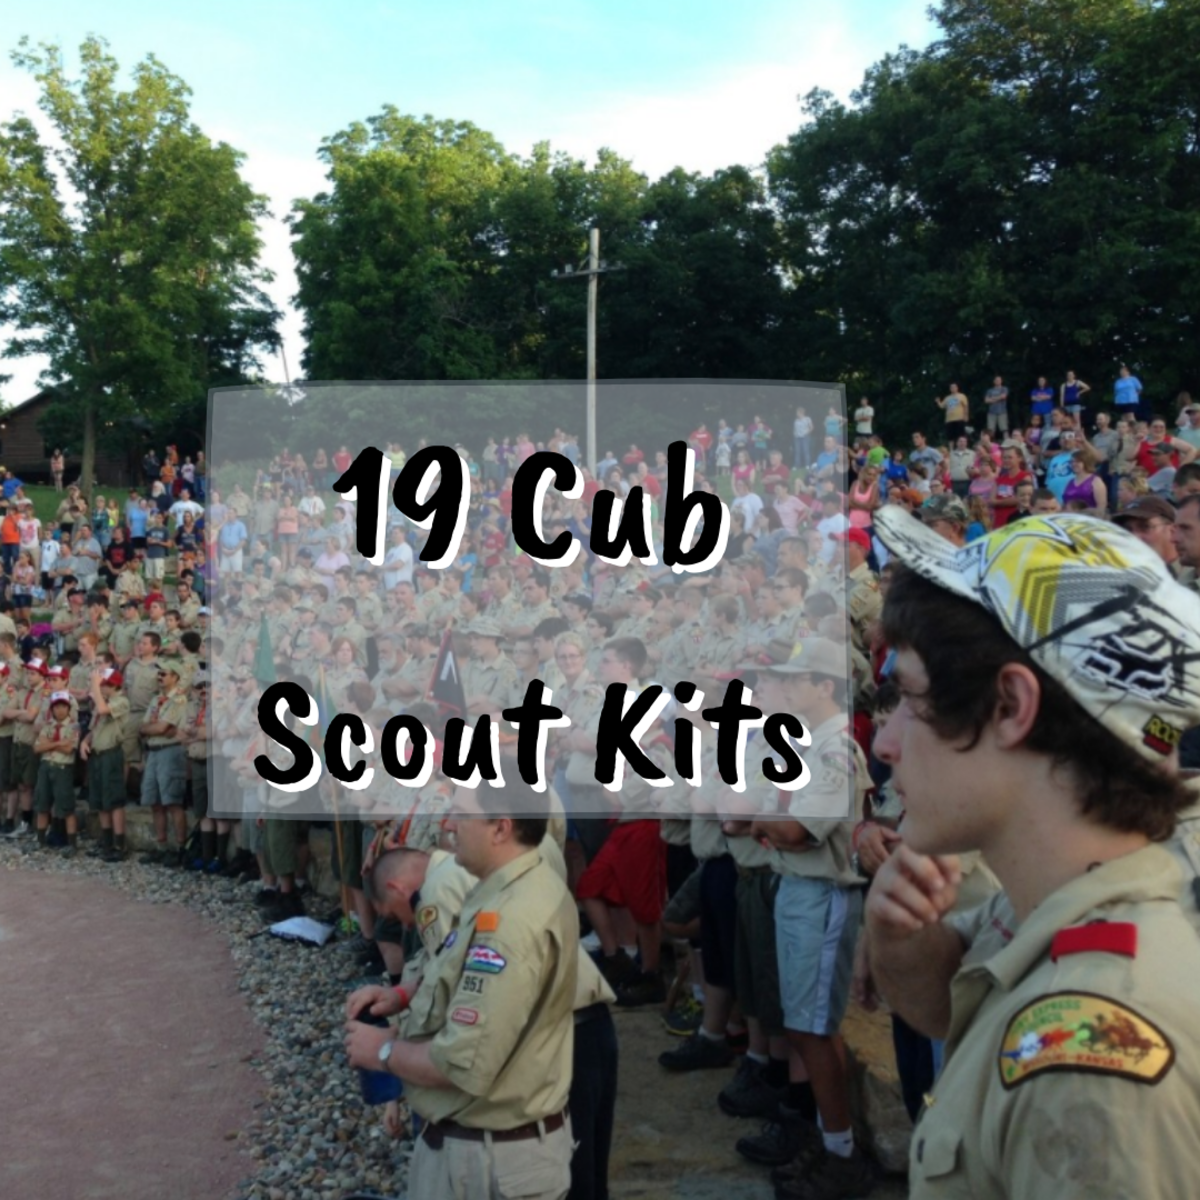 Read on to learn about 19 great cub scout kits that are also suitable for other camp settings such as Boy and Girl Scouts.